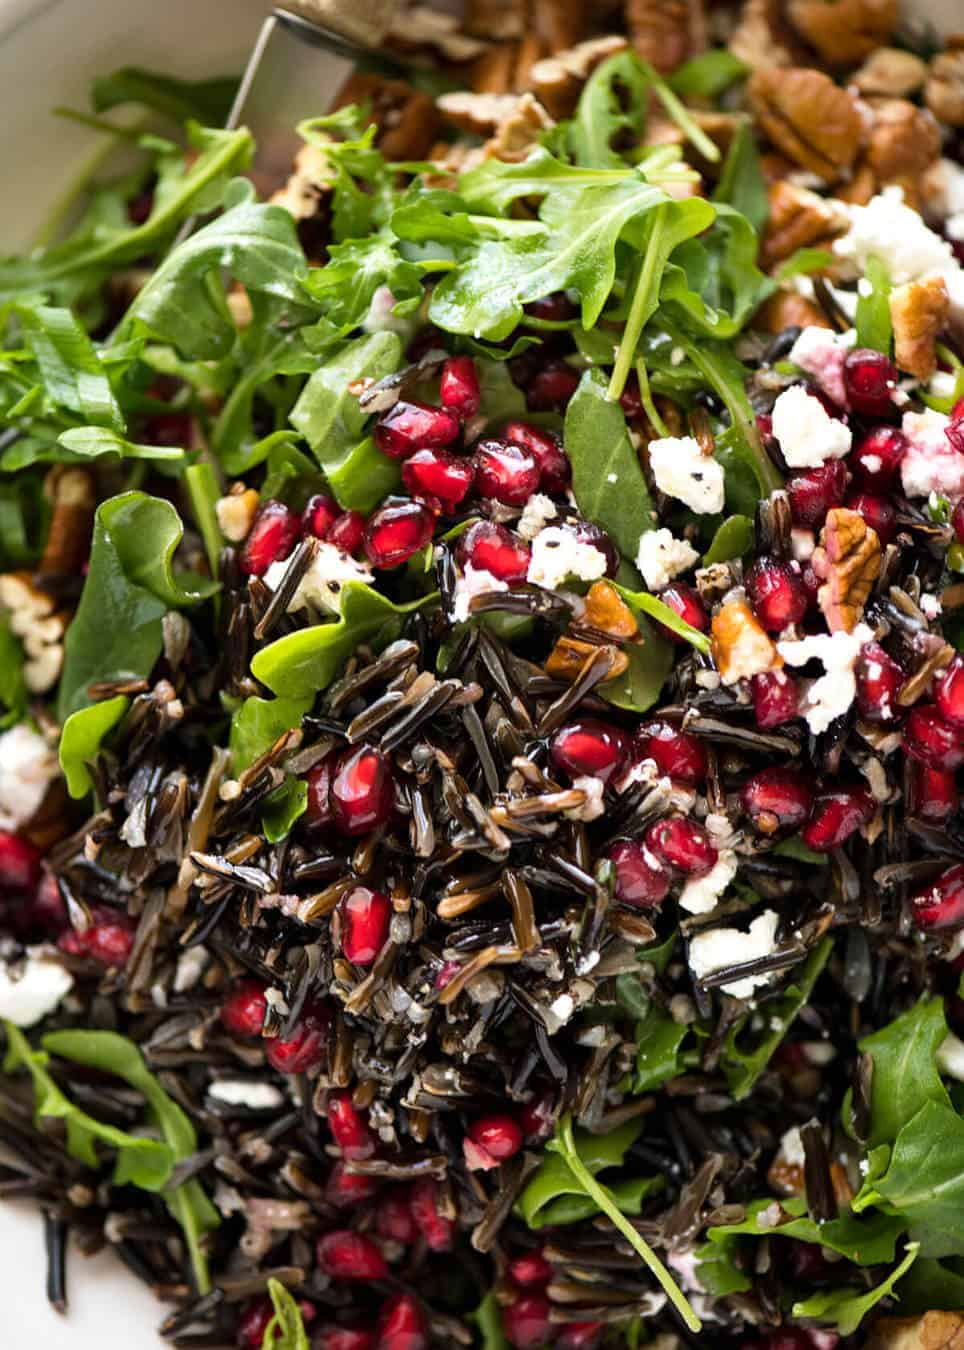 This Wild Rice Salad is a salad for celebrations! Stellar flavour combination - wild rice, pomegranate, pecans, rocket / arugula, green onions, cranberries and feta. www.recipetineats.com